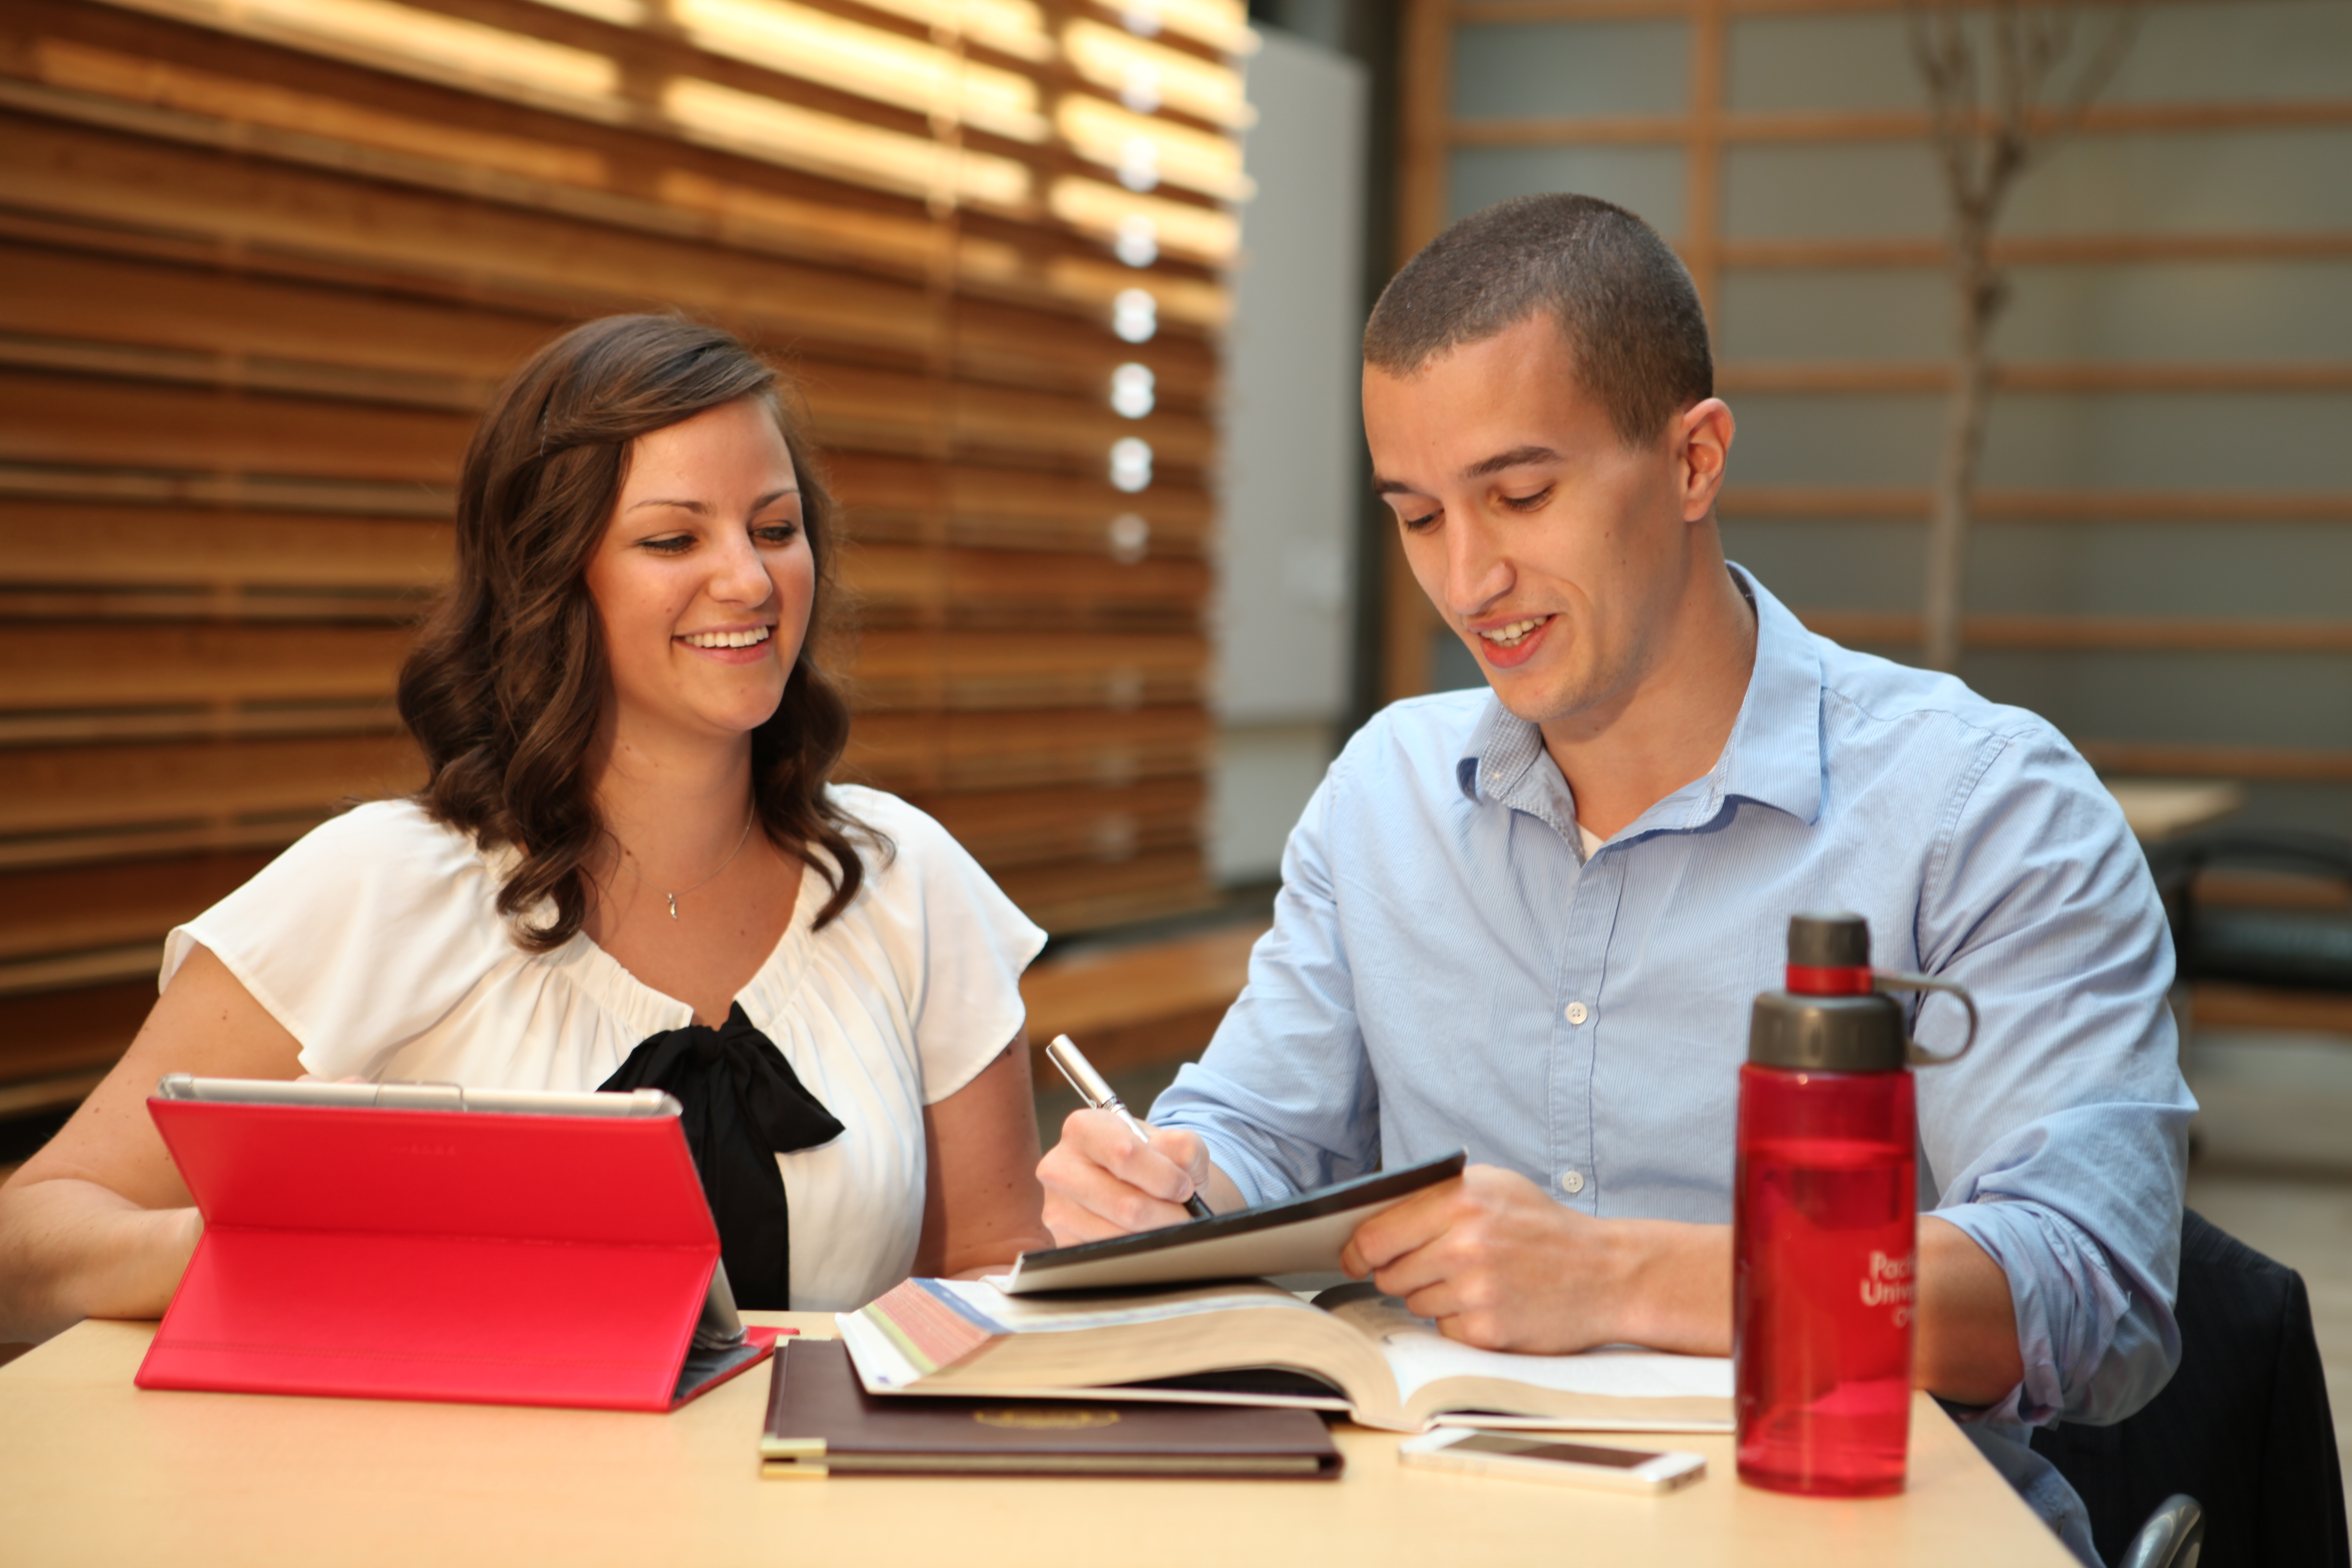 Two students sit at a table studying over an open textbook.